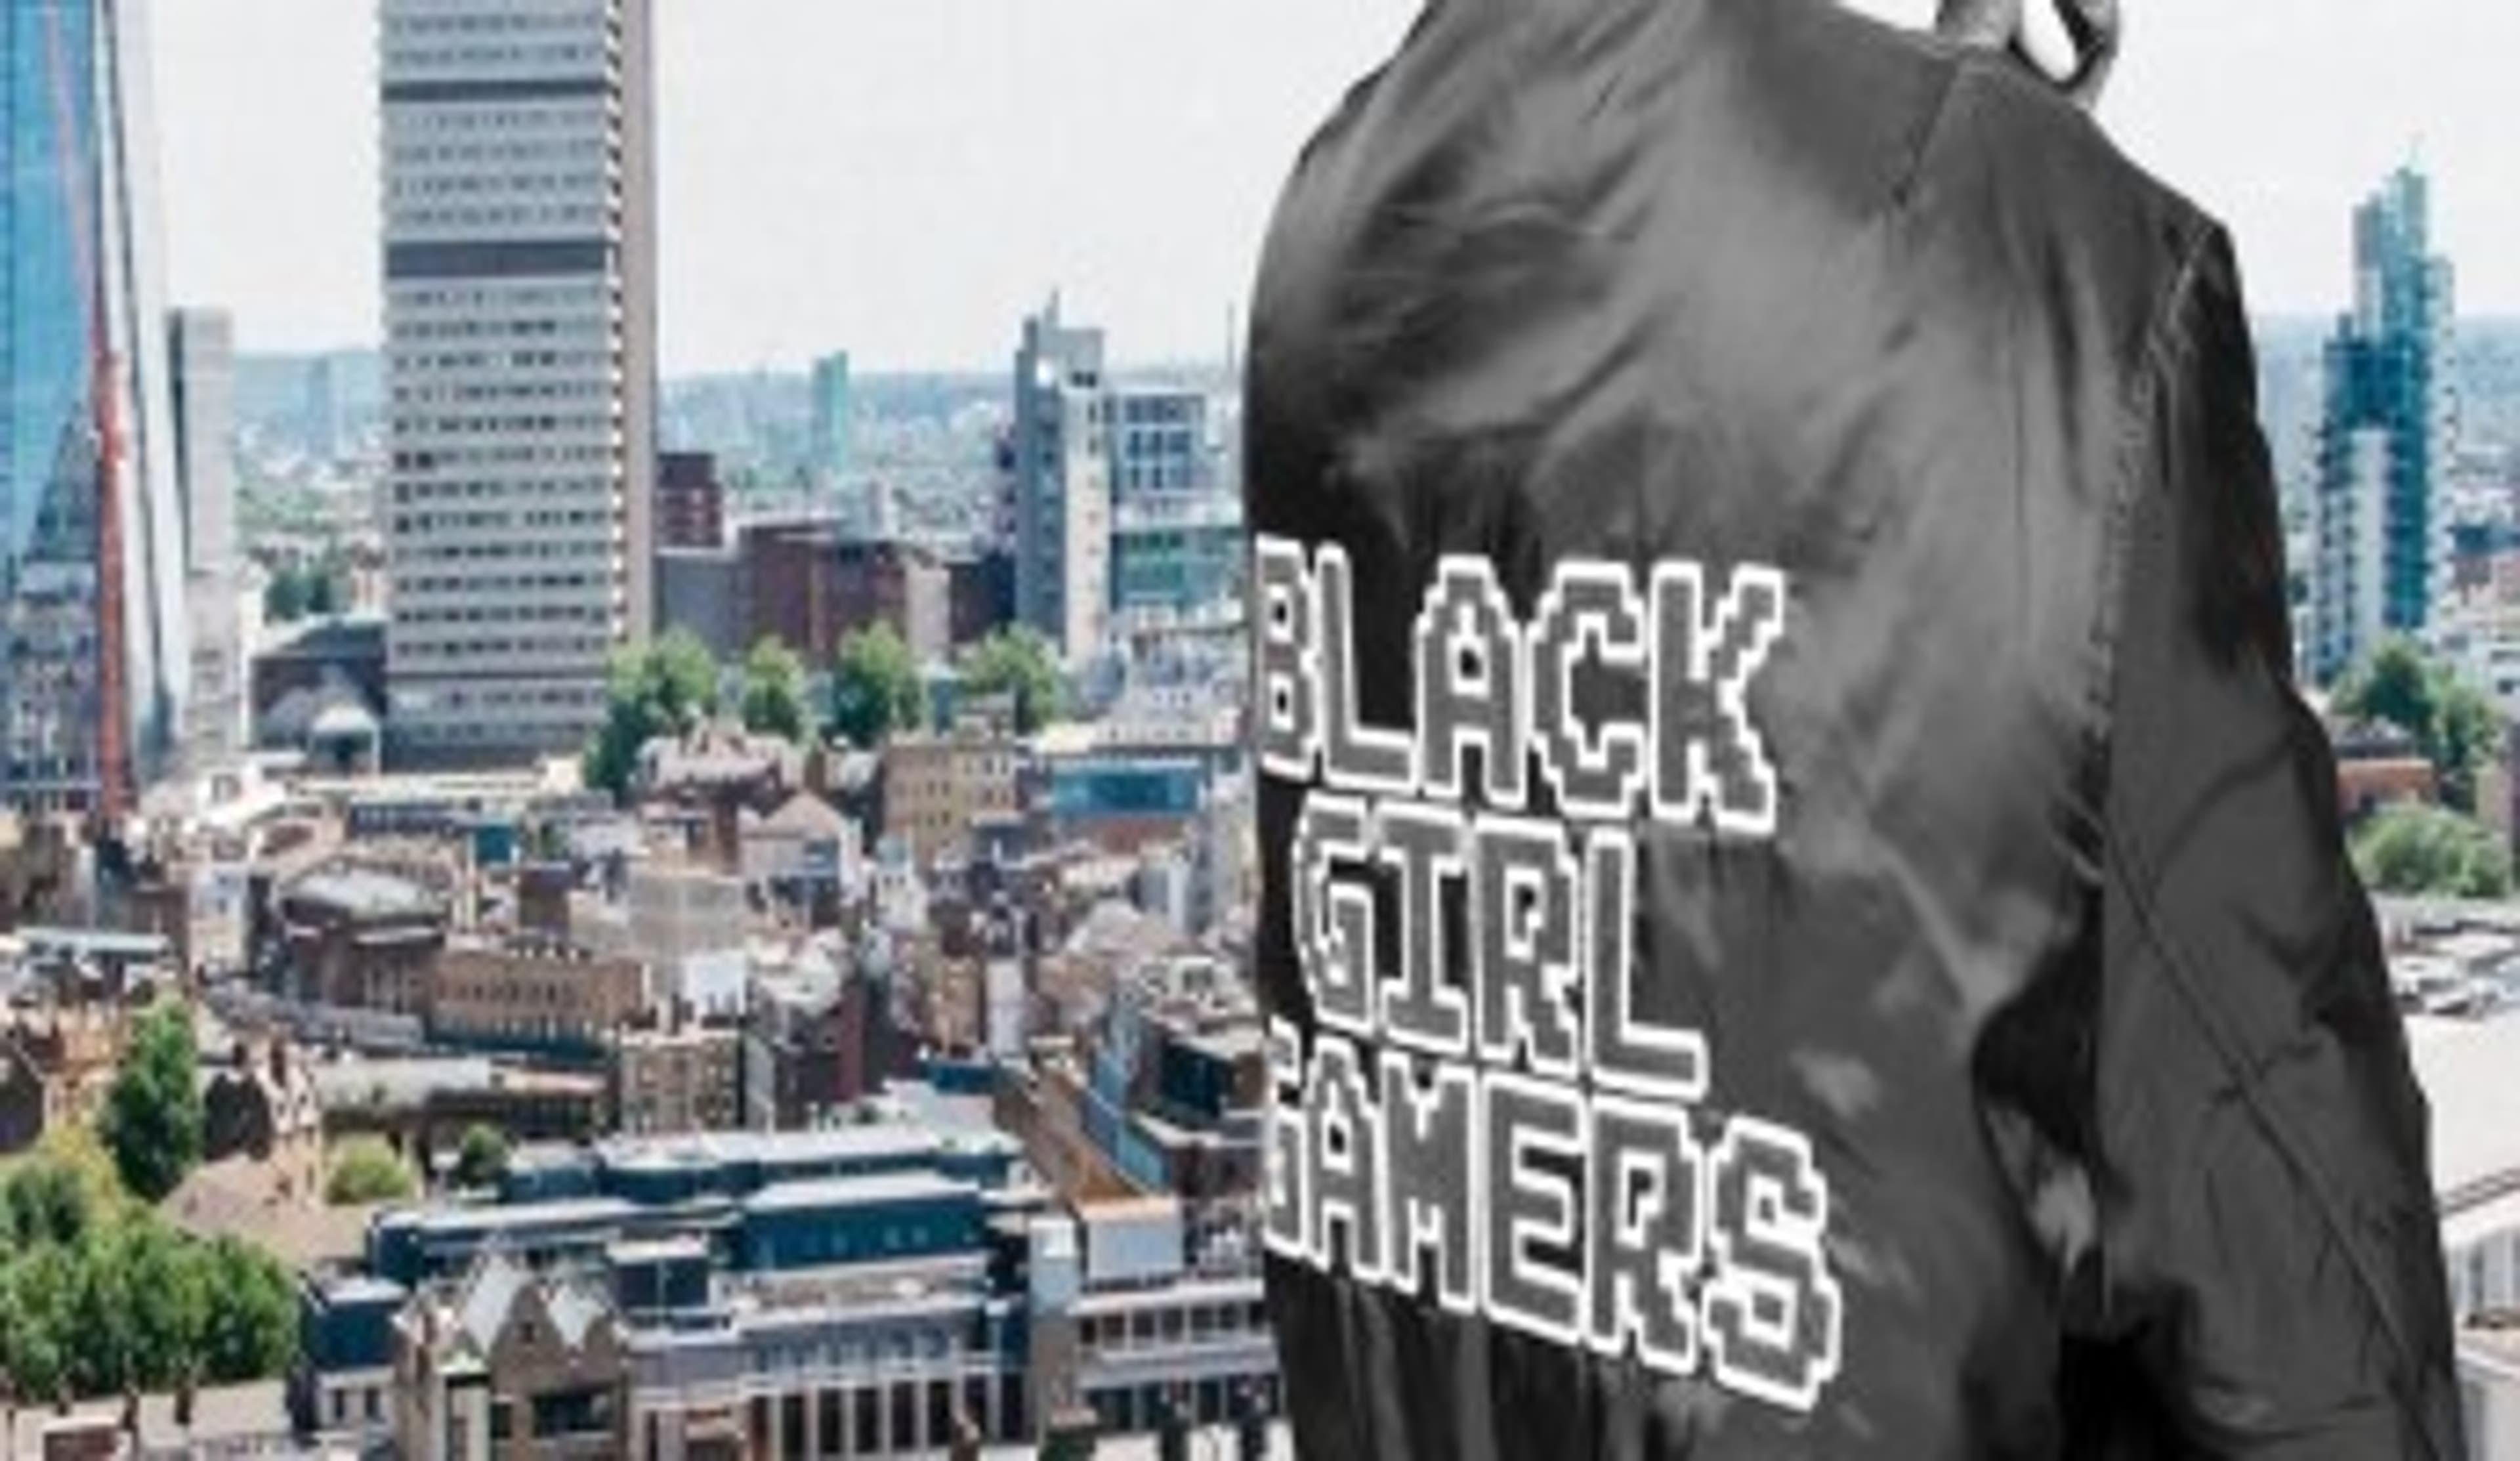  Black bomber jacket with stitch lettering 'Black Girl Gamers' on London city-scape 